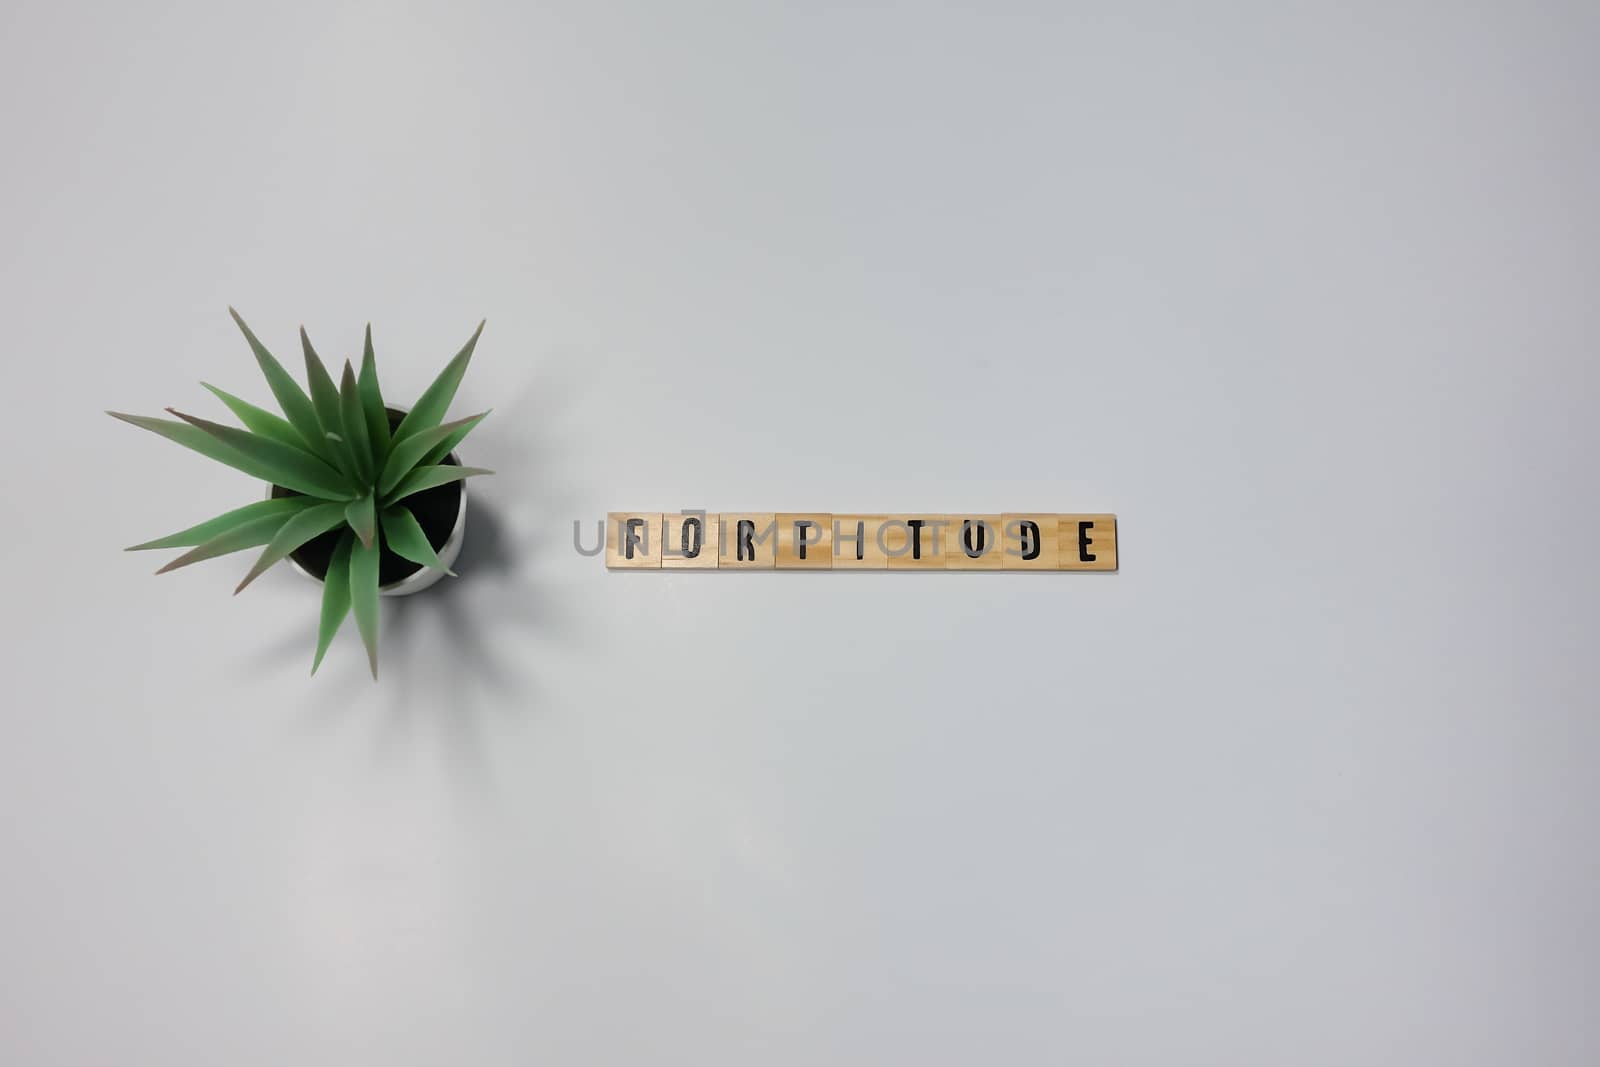 The word Fortitude written in wooden letter tiles on a white bac by Jshanebutt